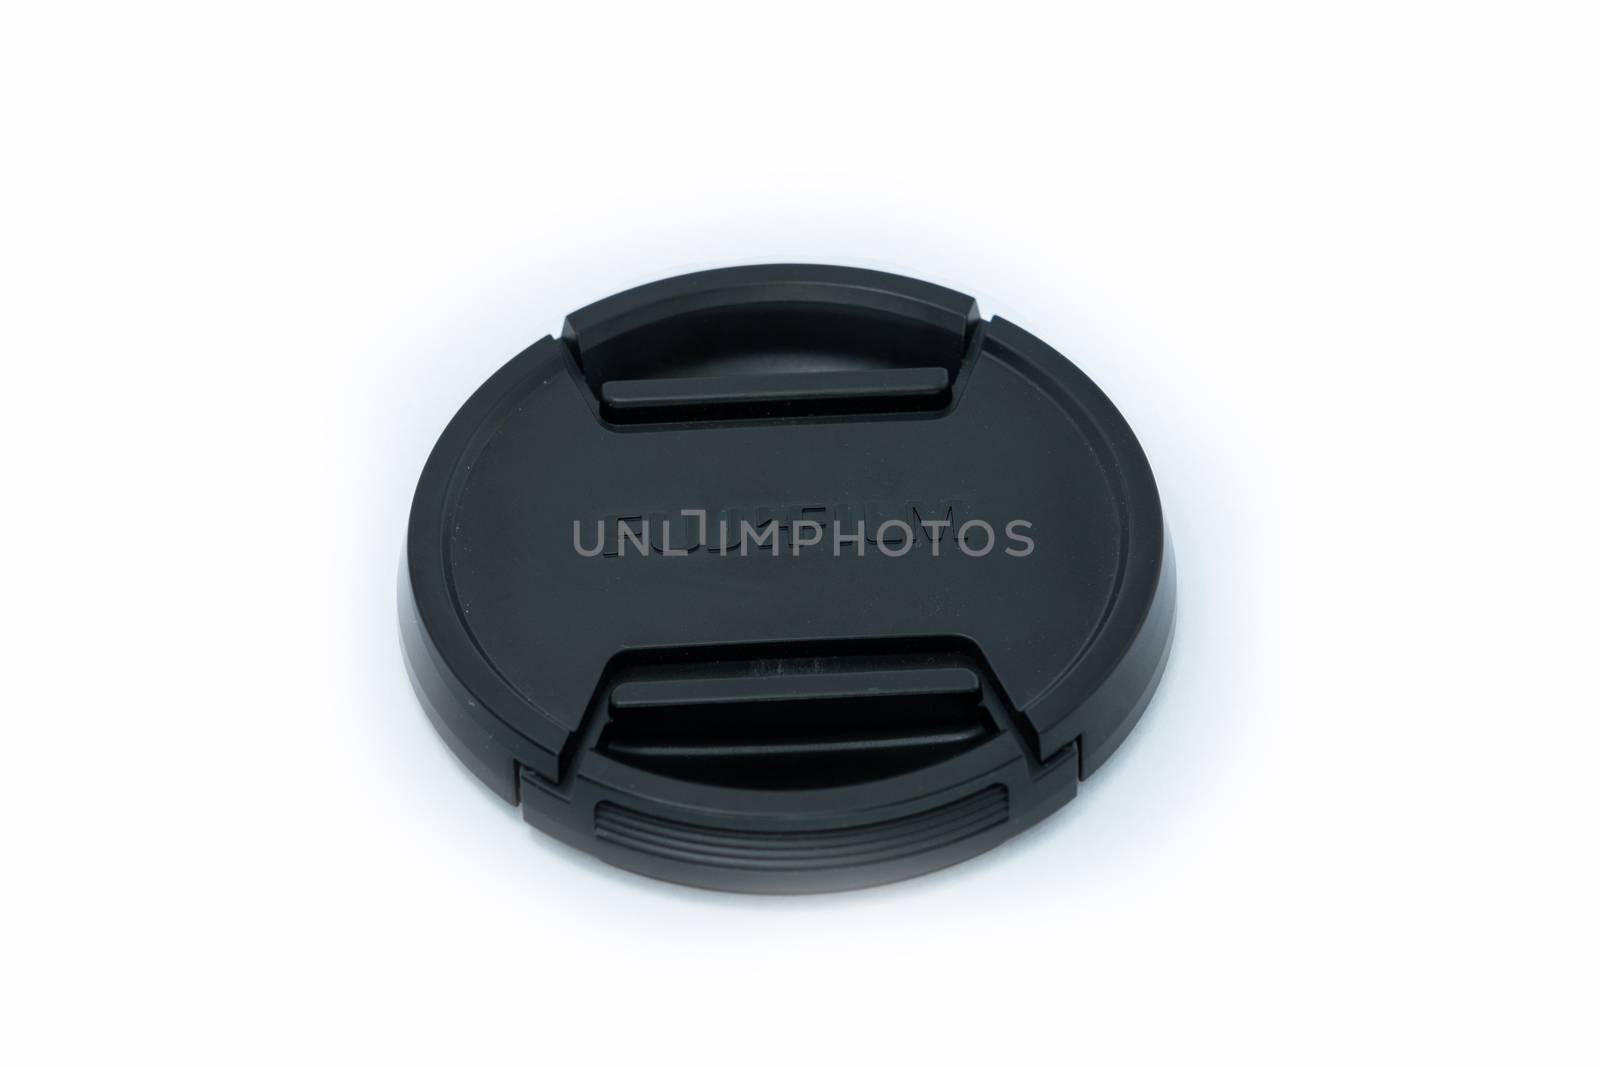 Chonburi, Thailand - MAY 20, 2020: Lens caps For Fujifilm lens on the withe background with space for put the text. by peerapixs